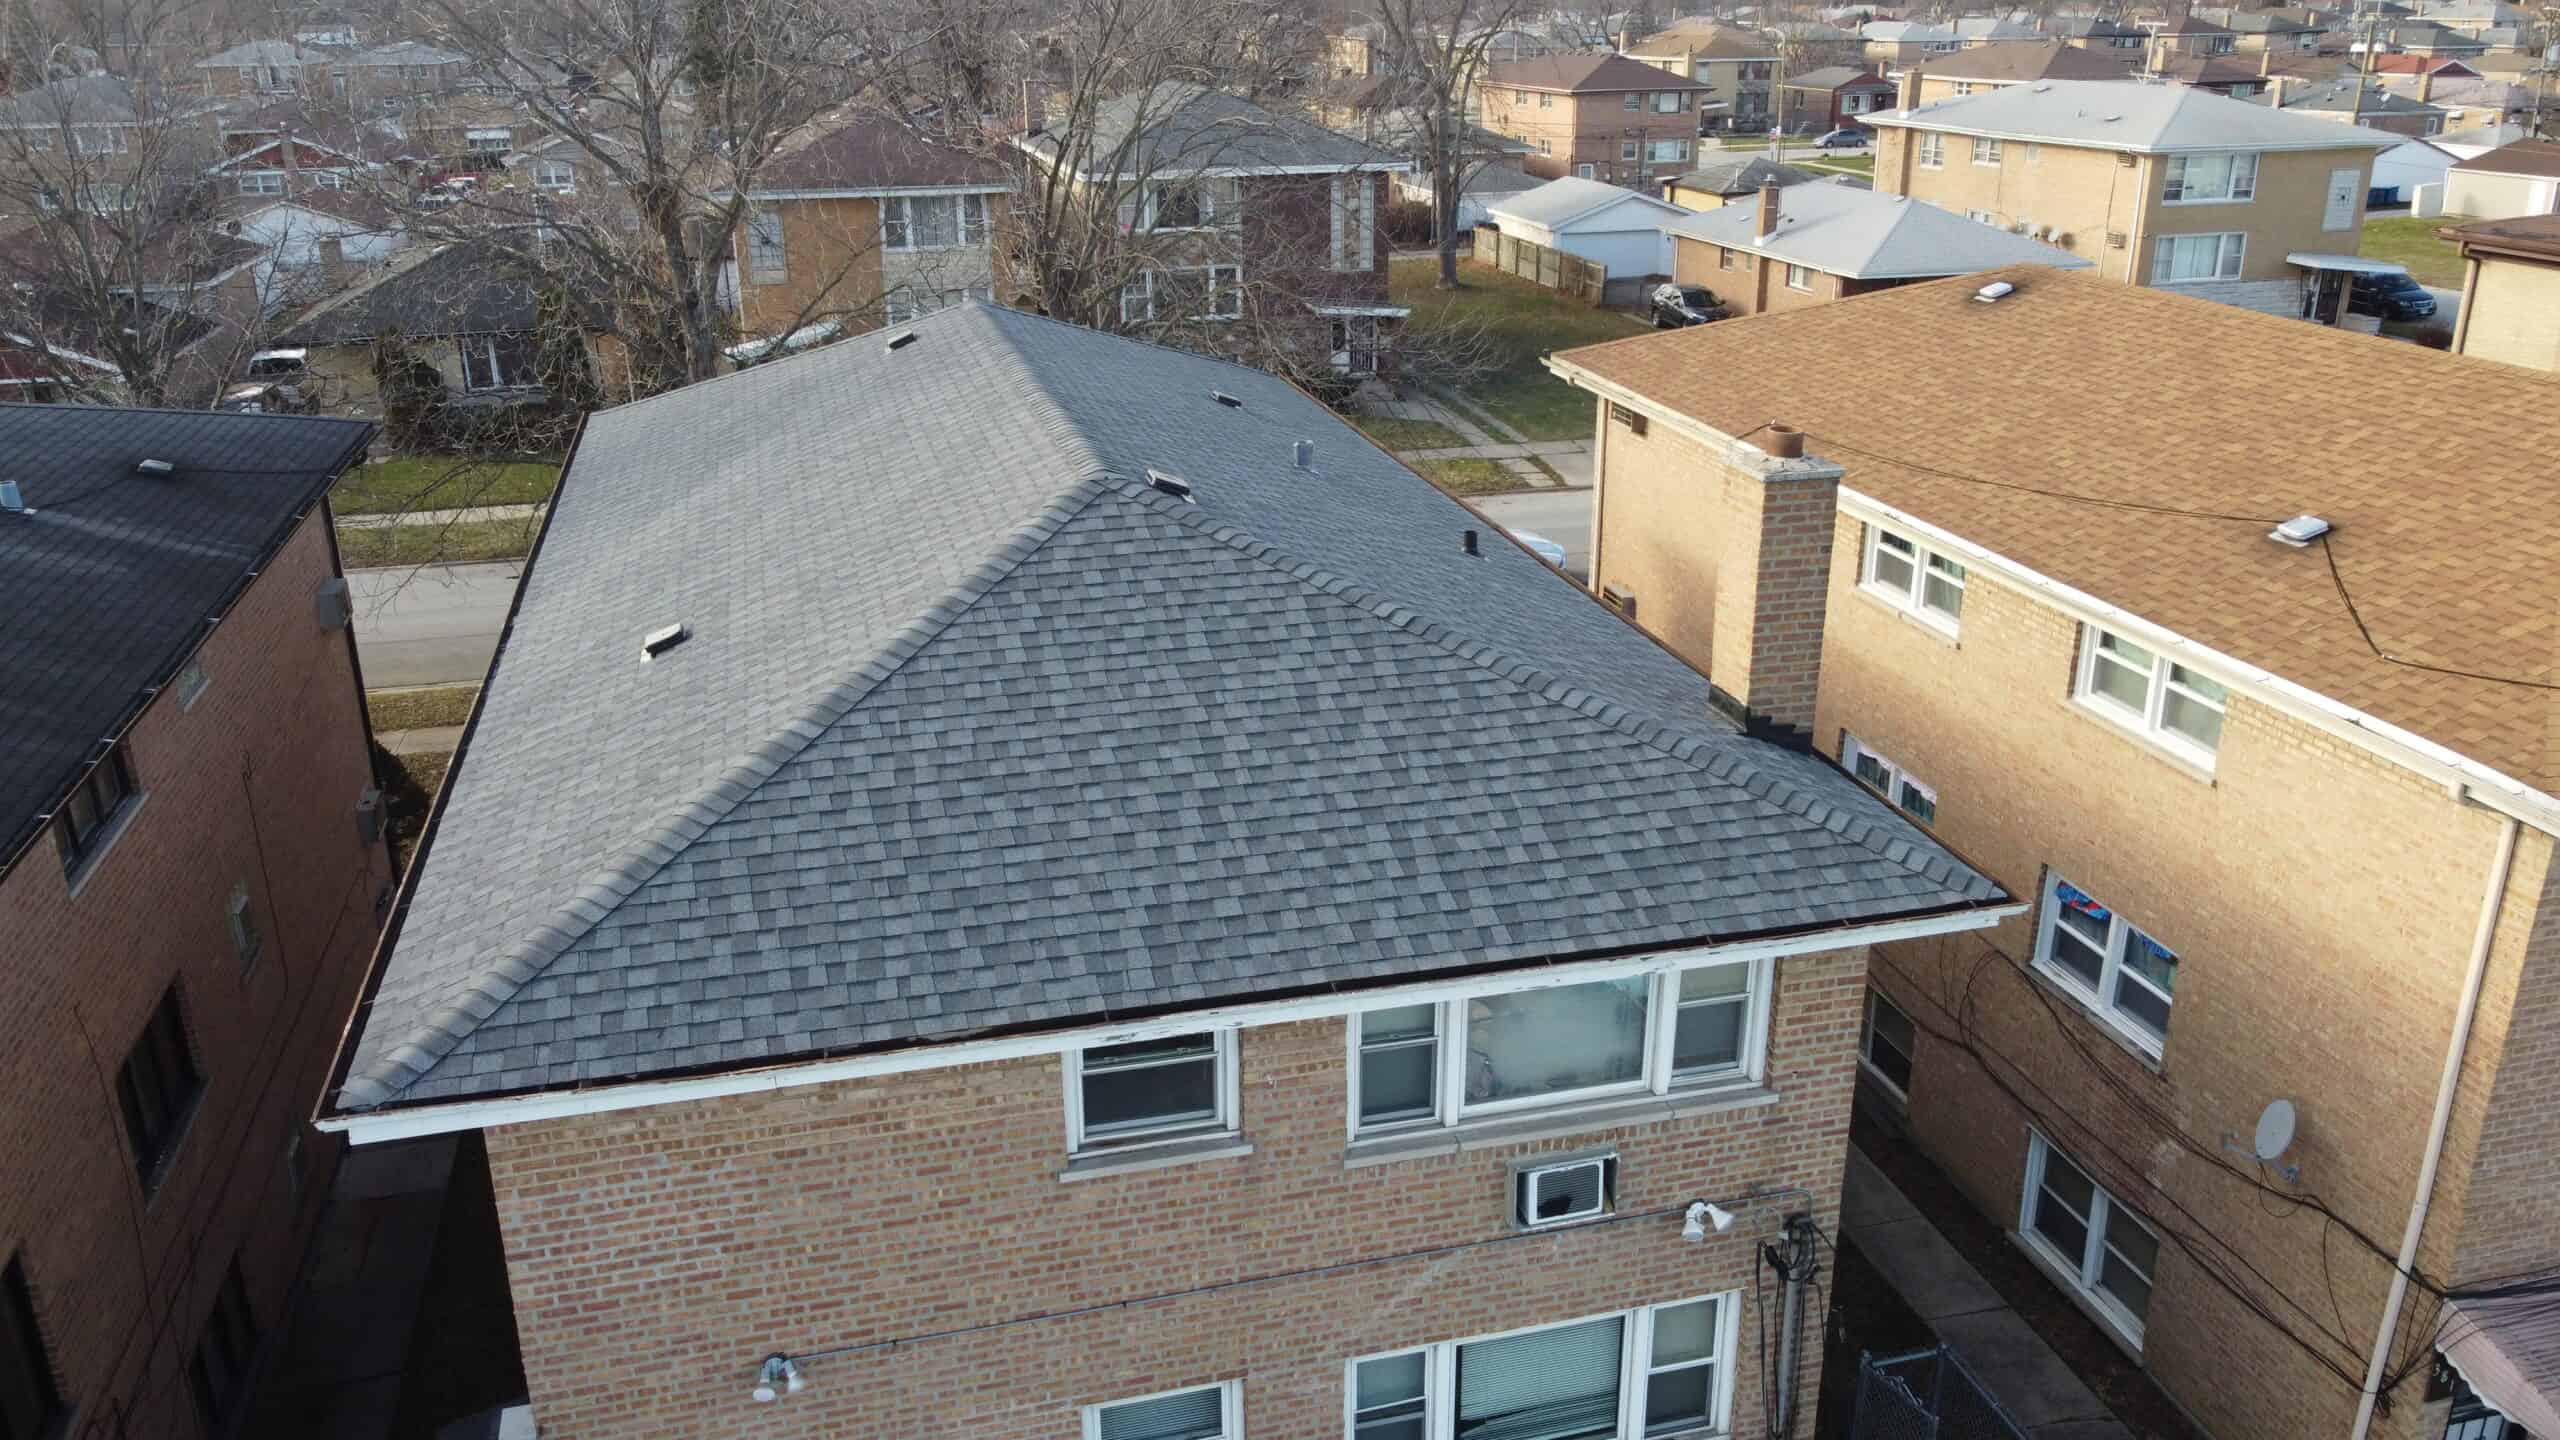 Featured image for “3 Story Roofing Project in Calumet City, IL”